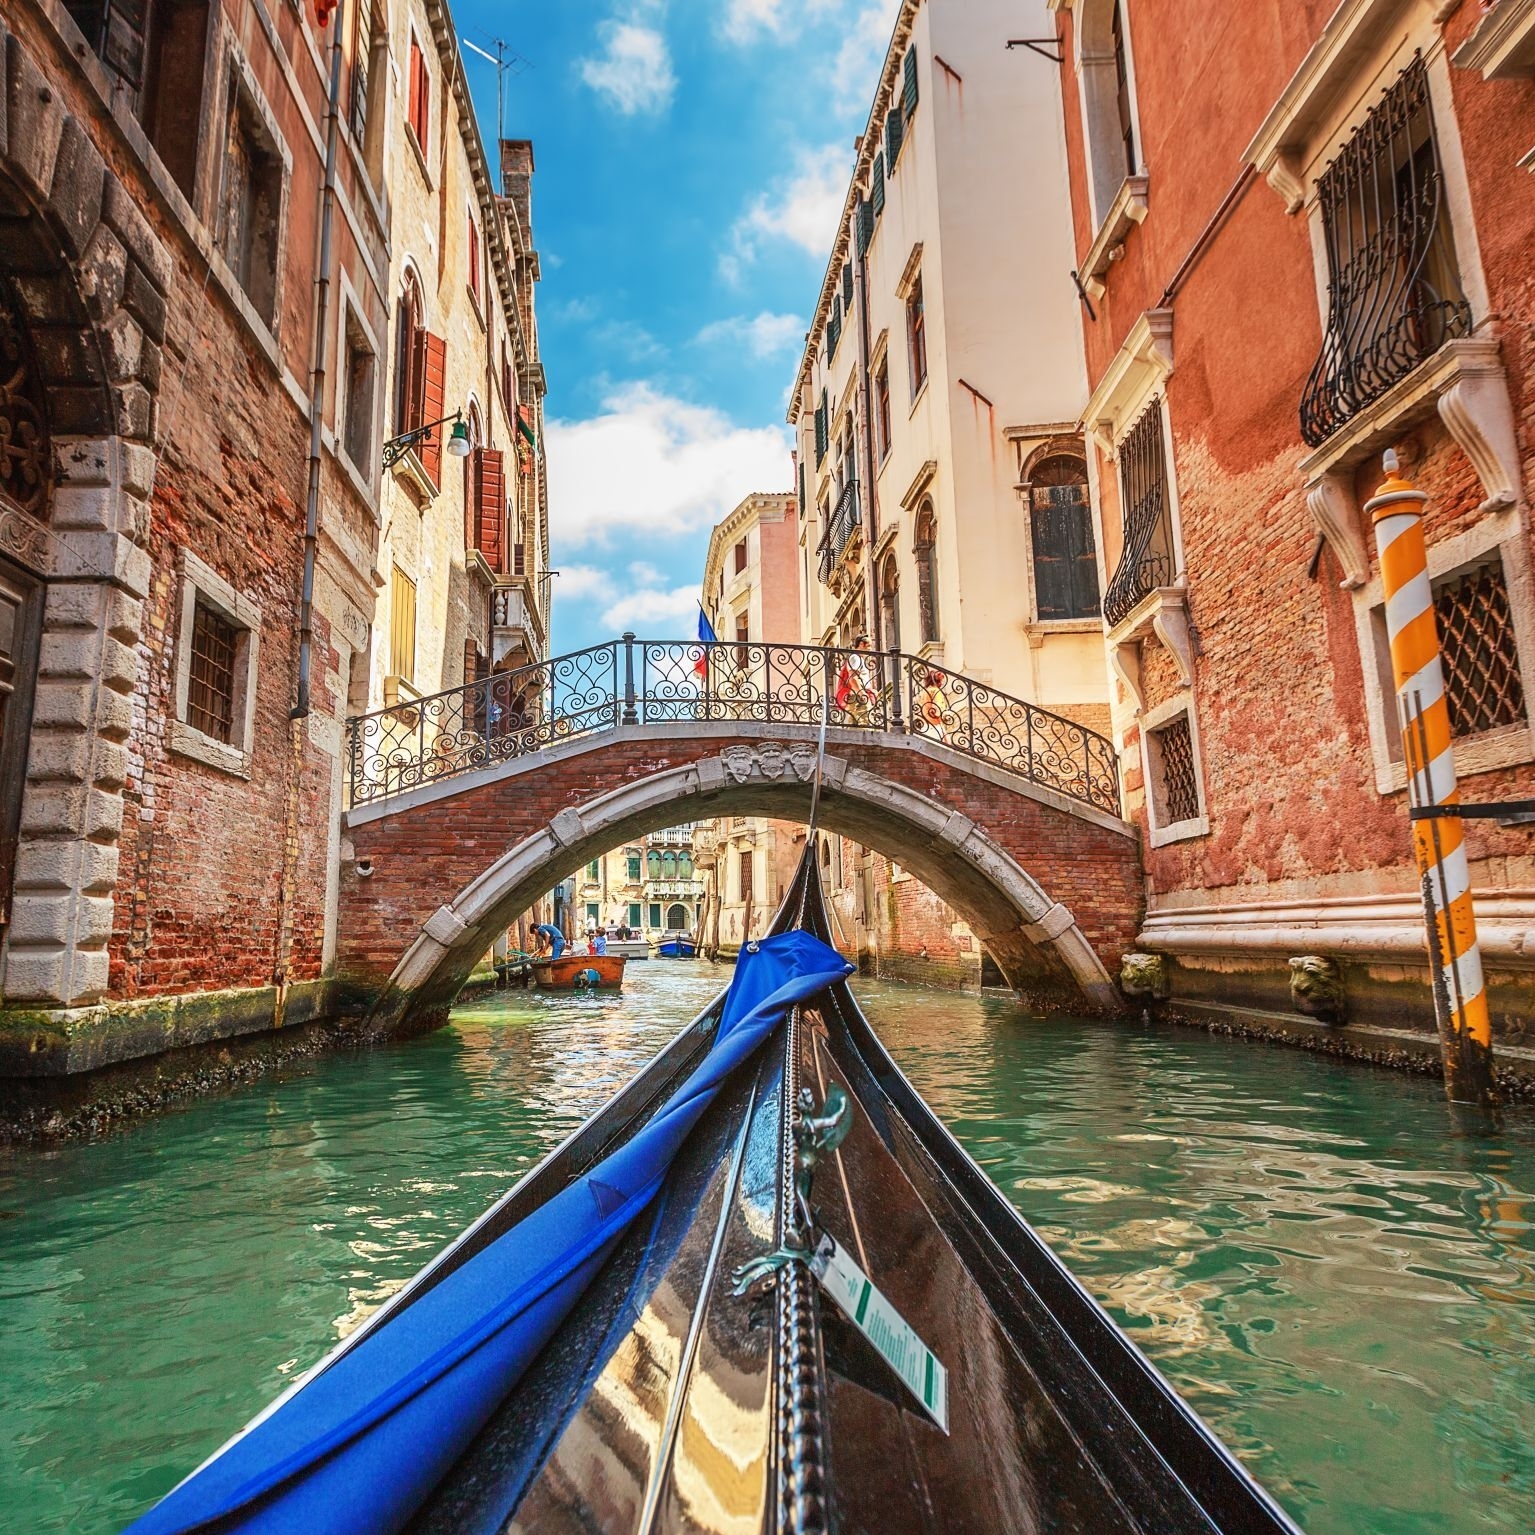 View from a gondola during the boat ride through the canals of Venice